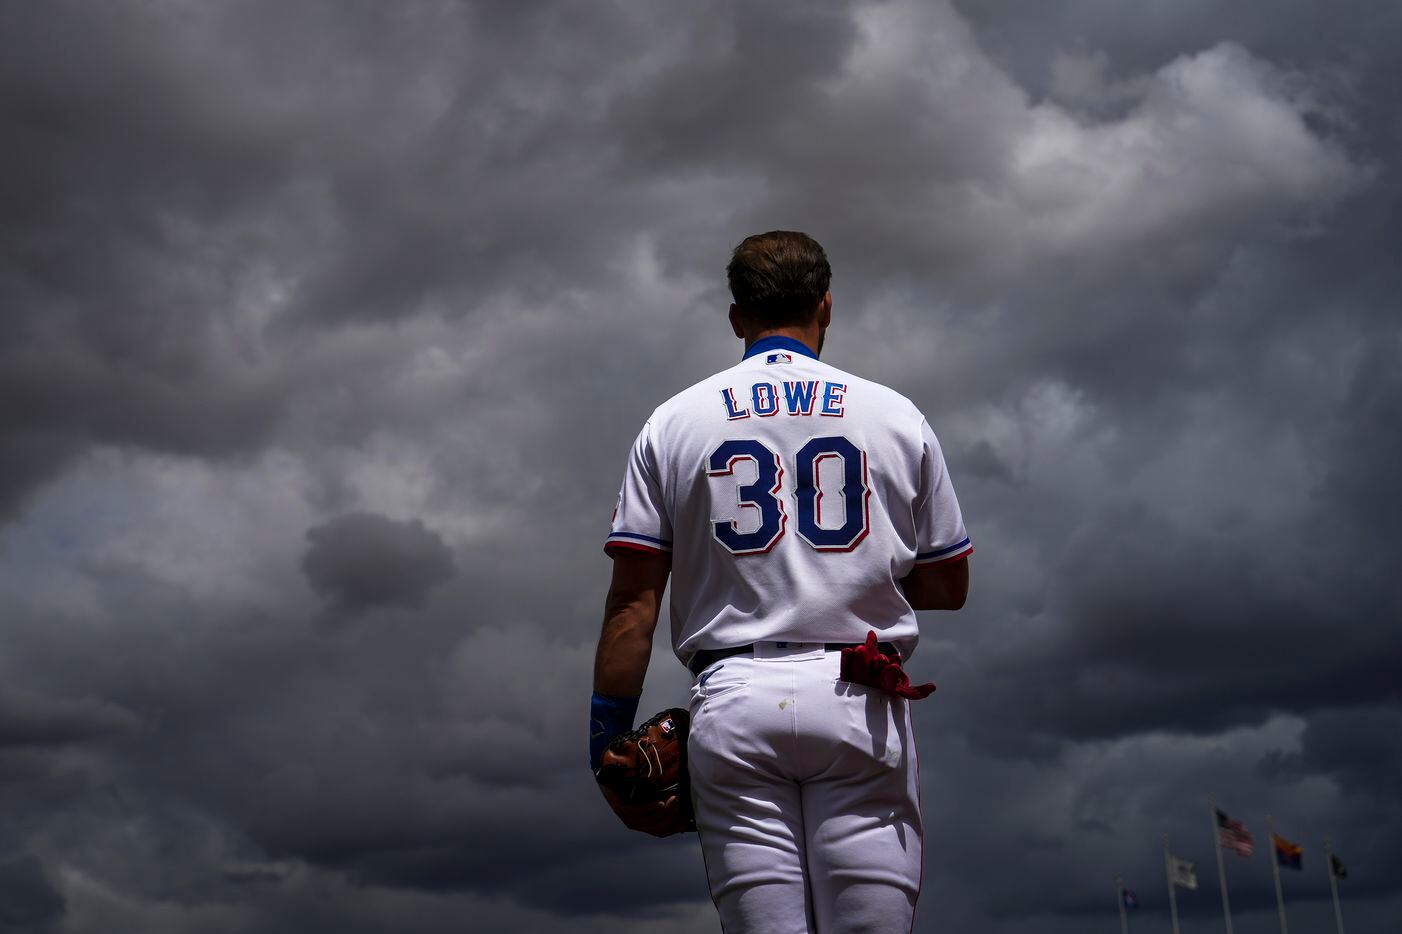 Texas Rangers infielder Nathaniel Lowe stands for the national anthem as clouds from a...